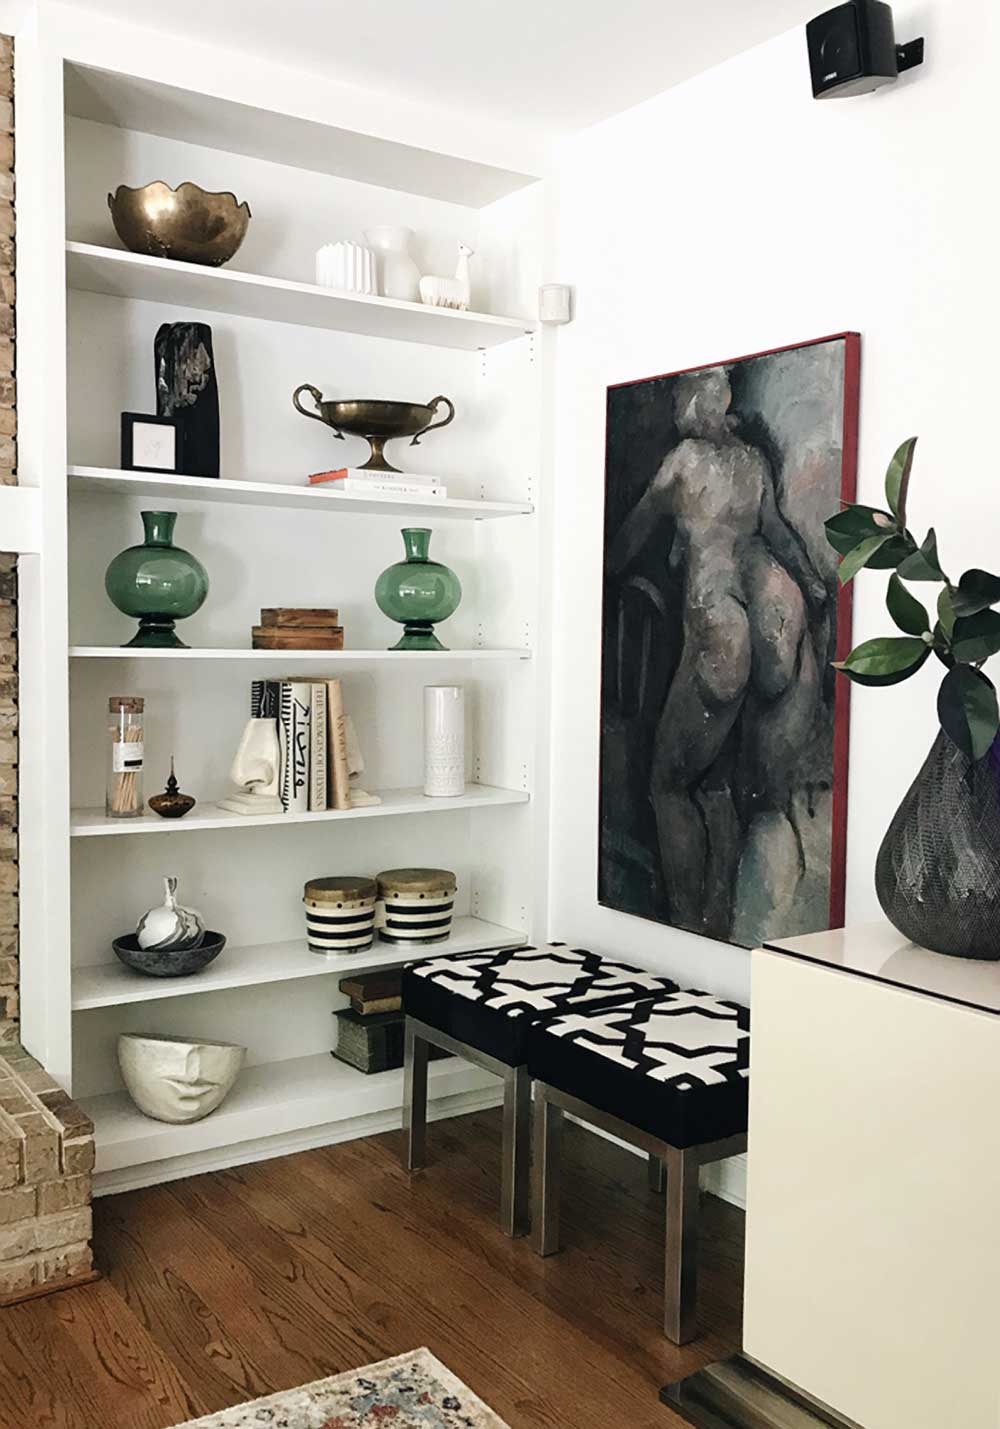 Tips On Where To Find Original Affordable Art For The Home